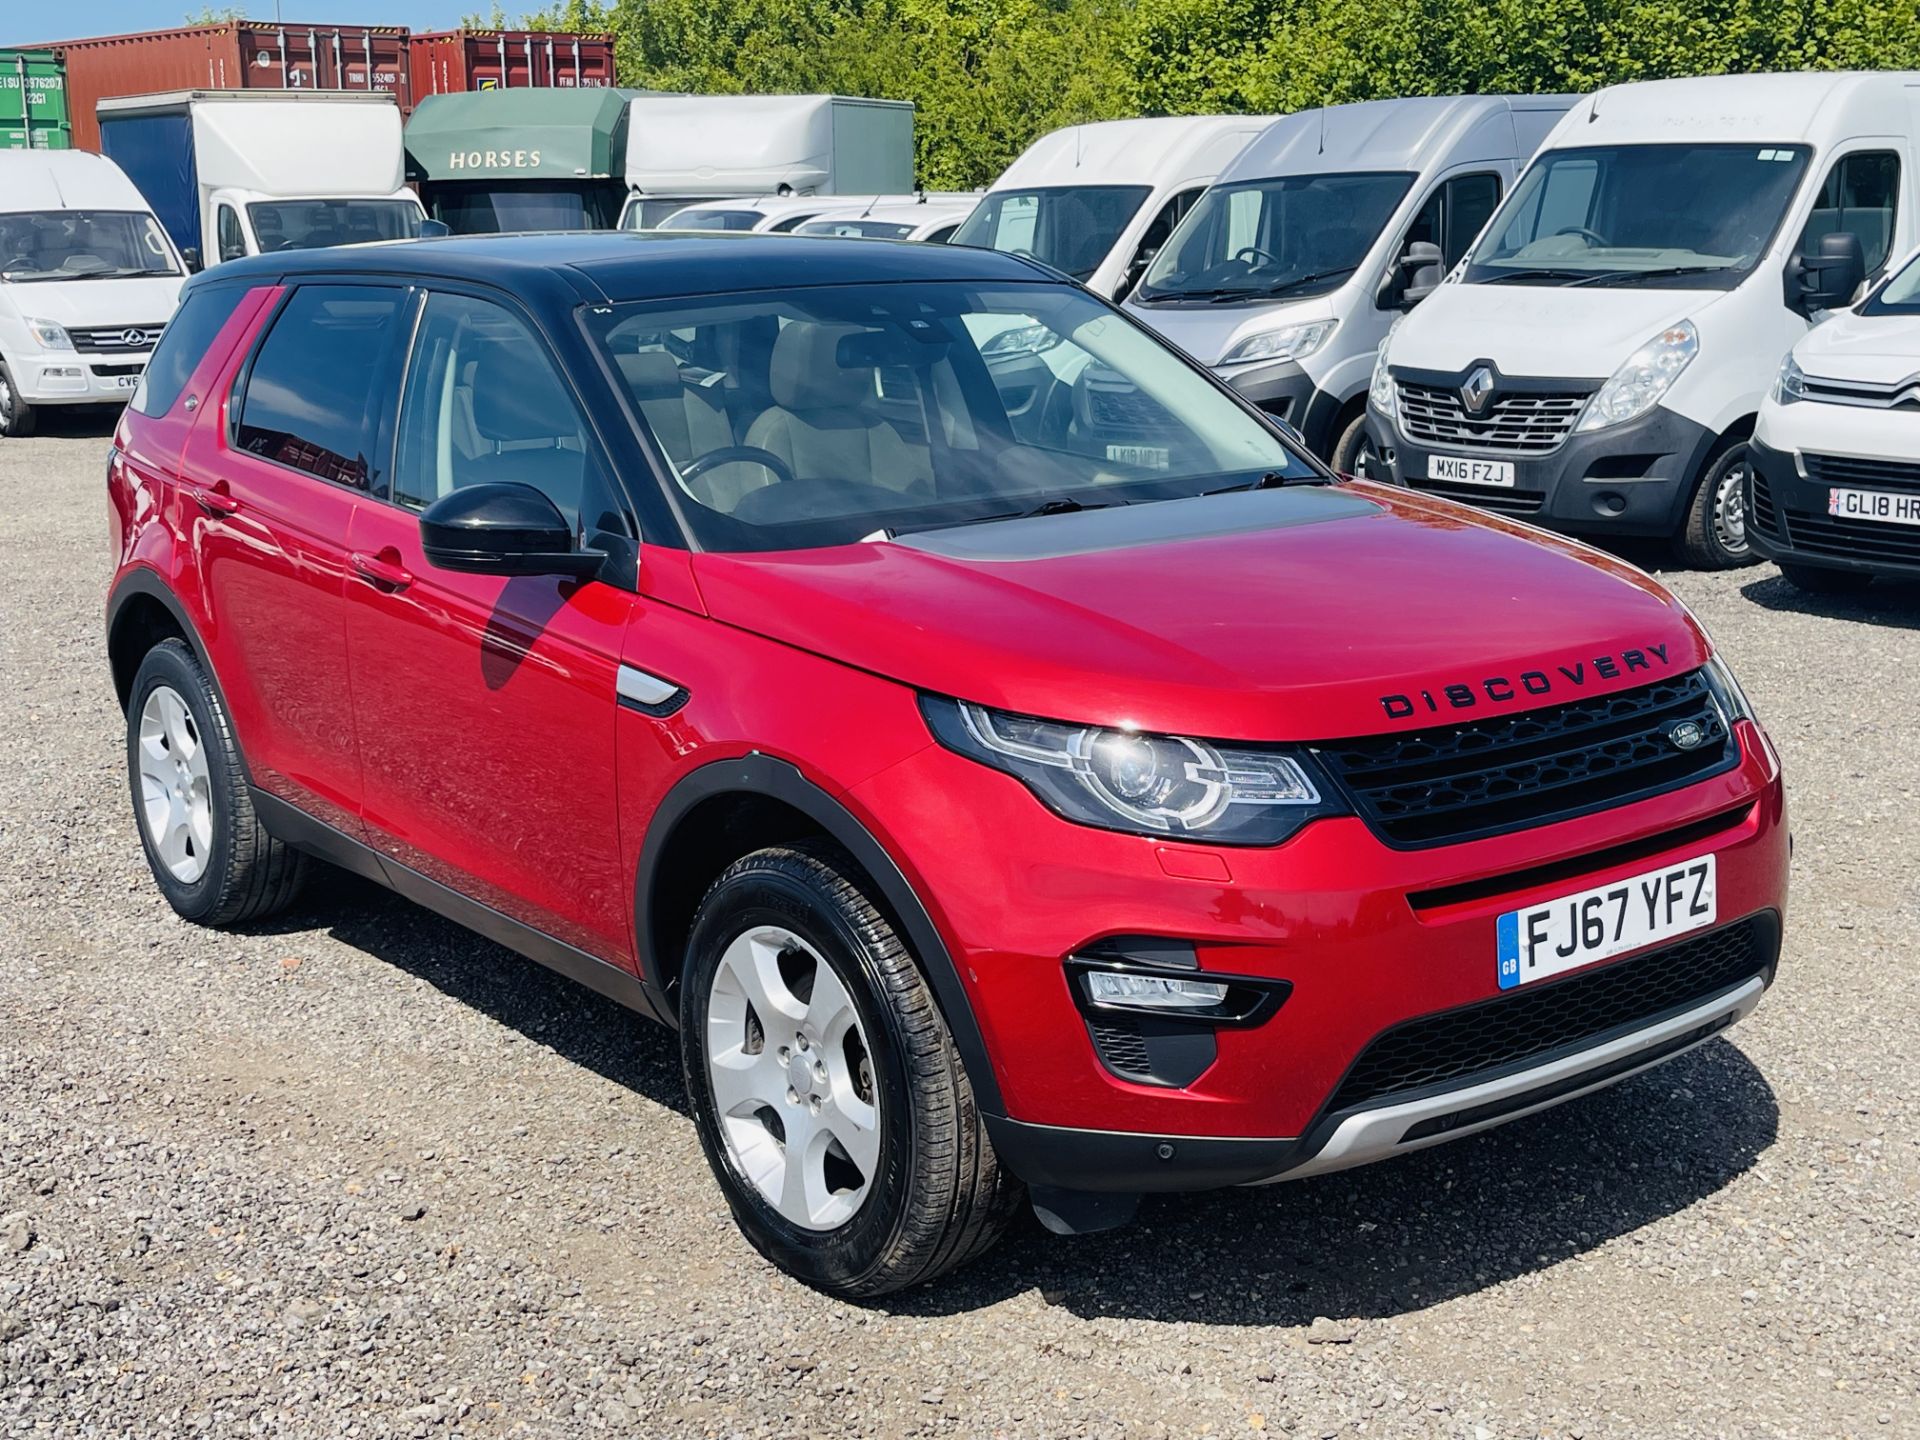 Land Rover Discovery Sport HSE 2.0 ED4 2017 '67 Reg' Sat Nav - Panoramic Glass Roof - ULEZ Compliant - Image 15 of 33